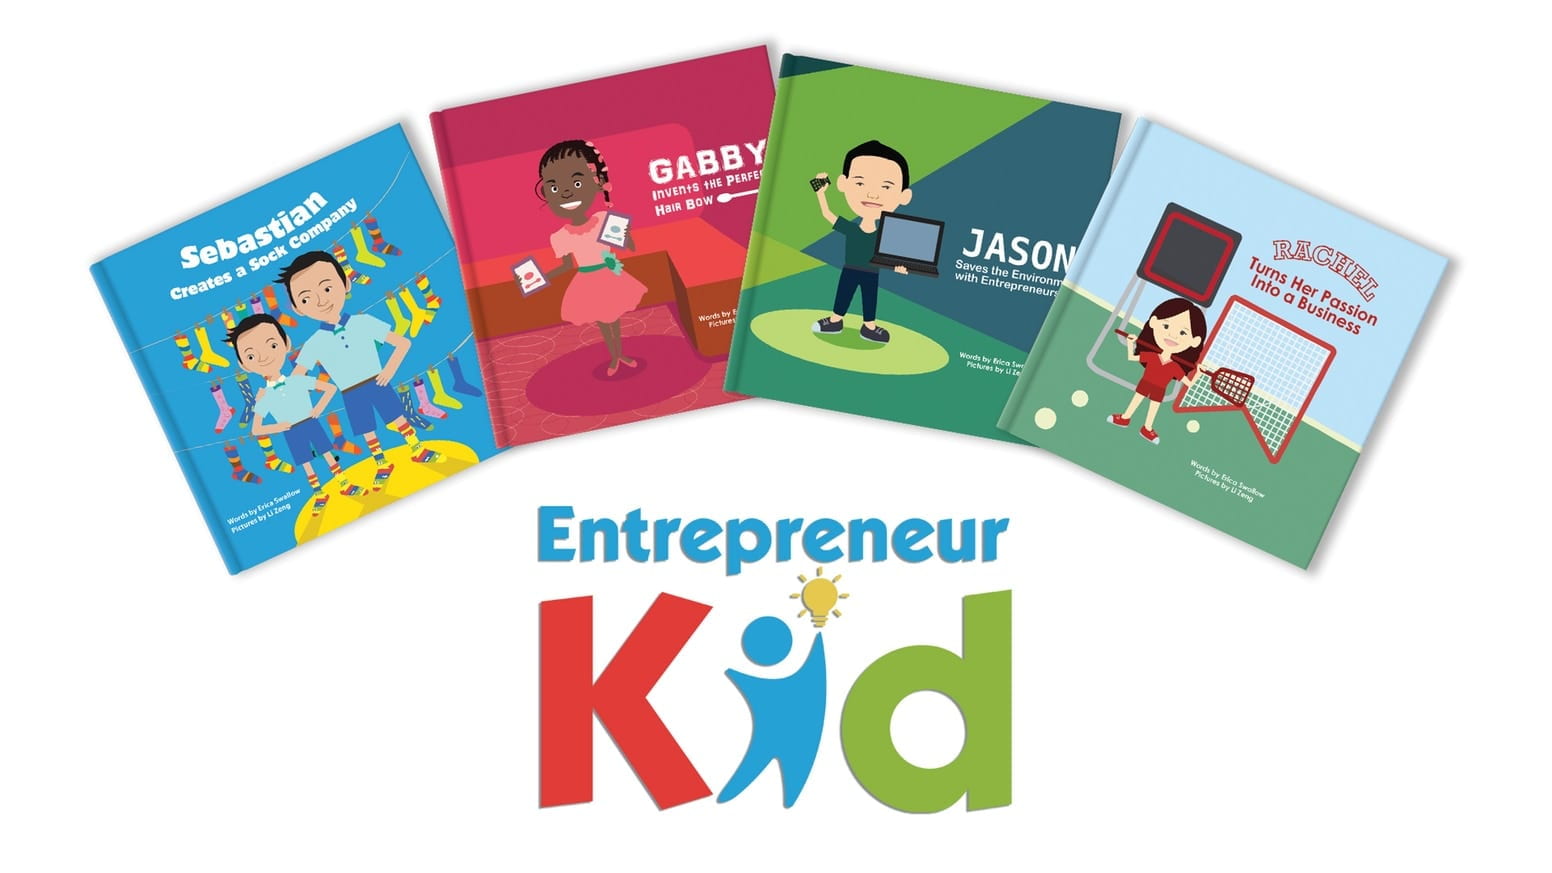 Entrepreneur Kid Series by Erica Swallow – an Arkansas native from Paragould